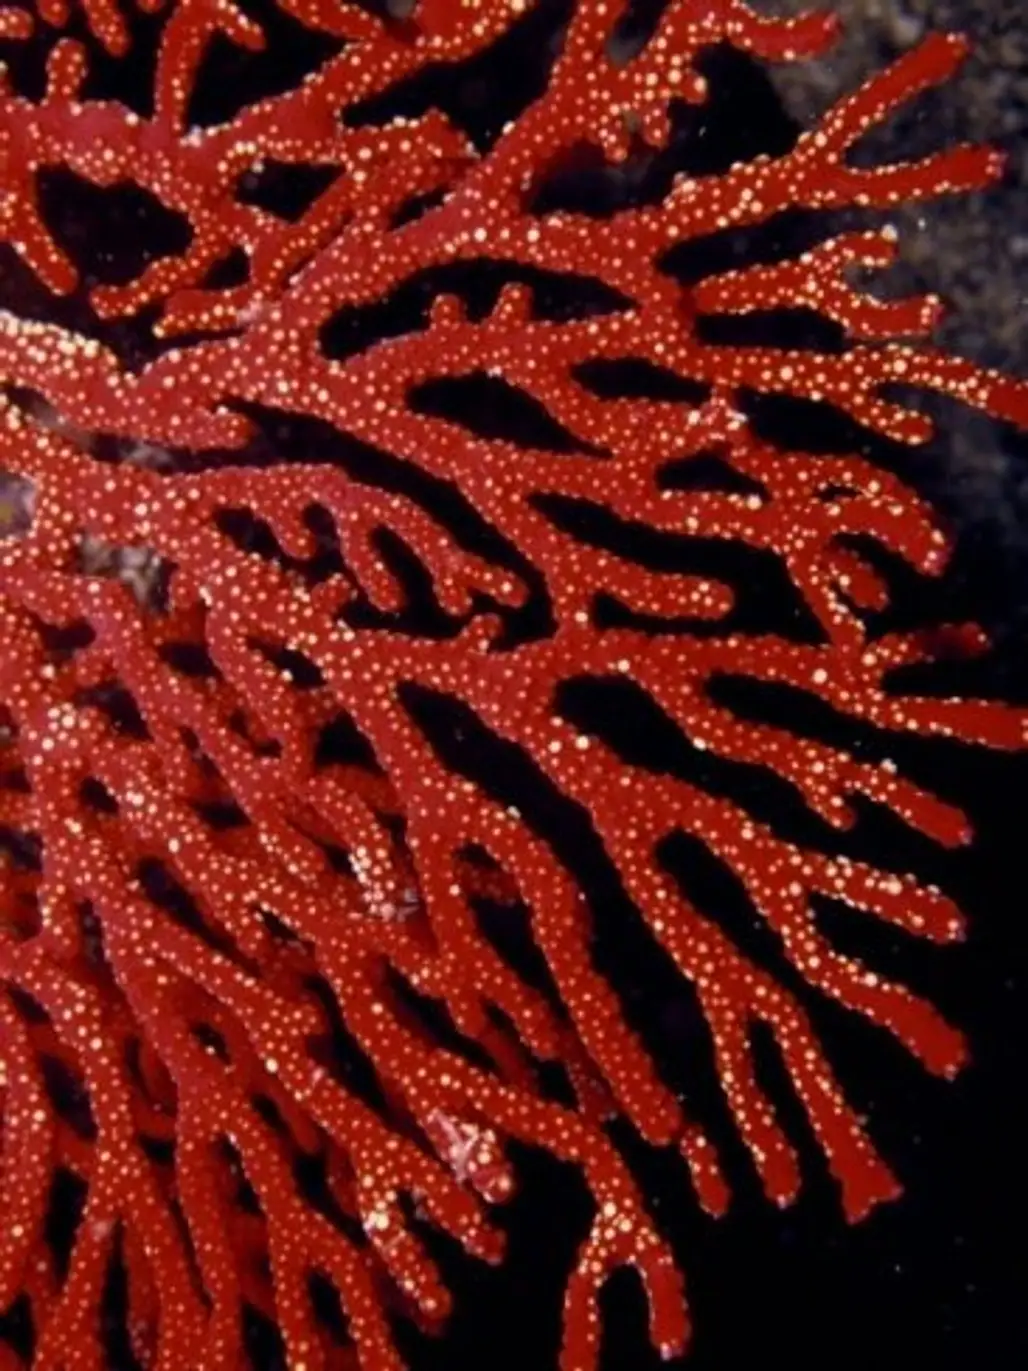 Bright Red Gorgonian Soft Coral Flares